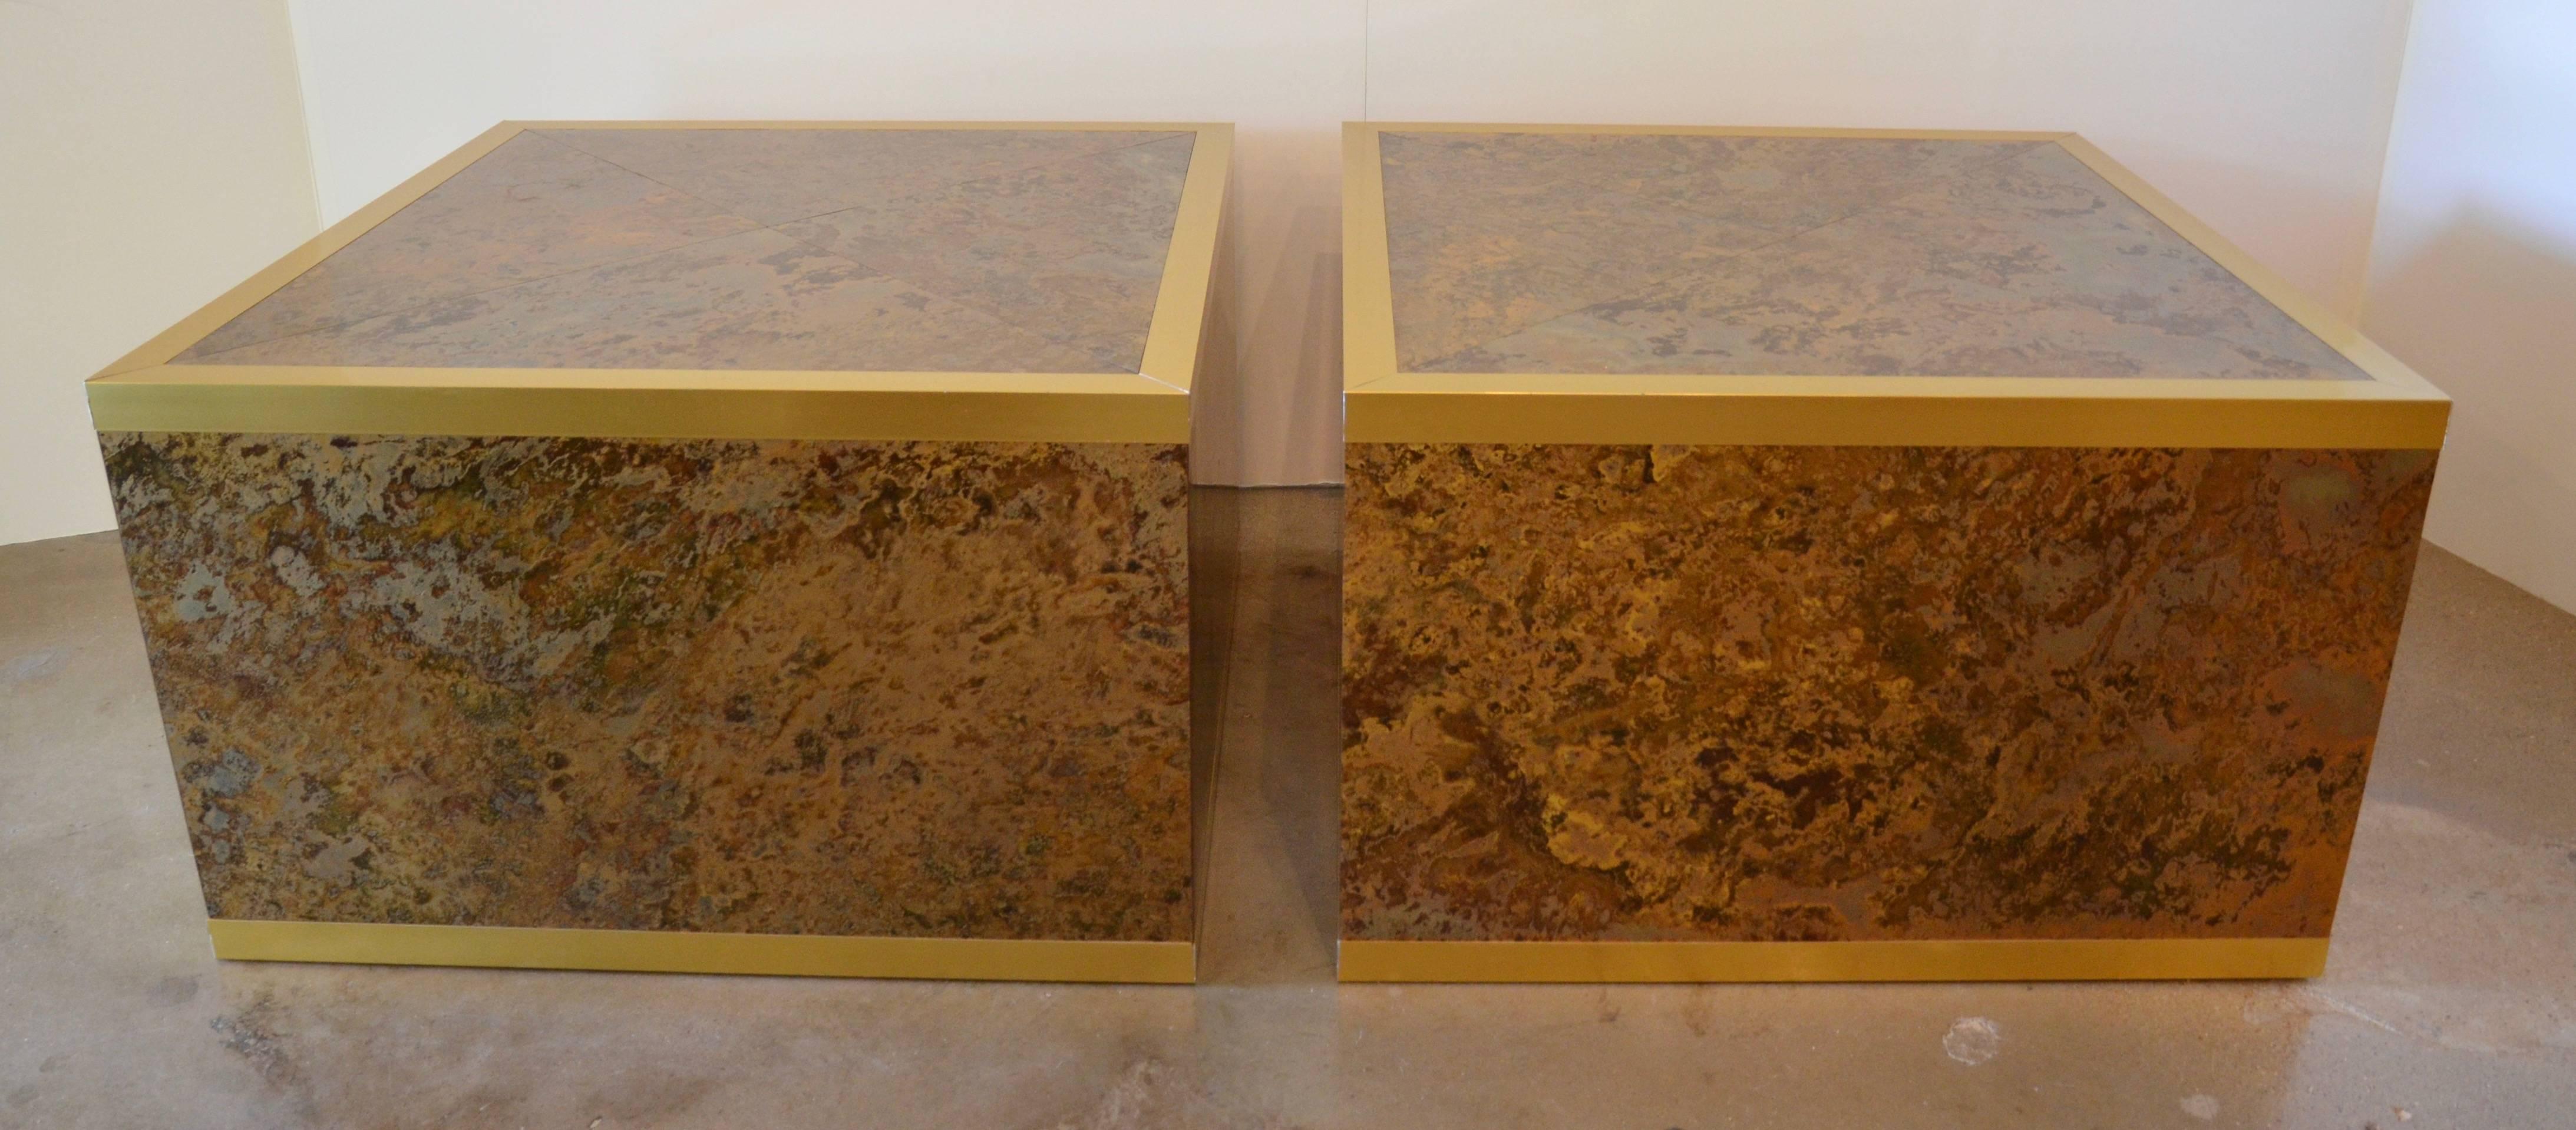 American Faux Tortoise Shell and Brass Cube Tables by Lane